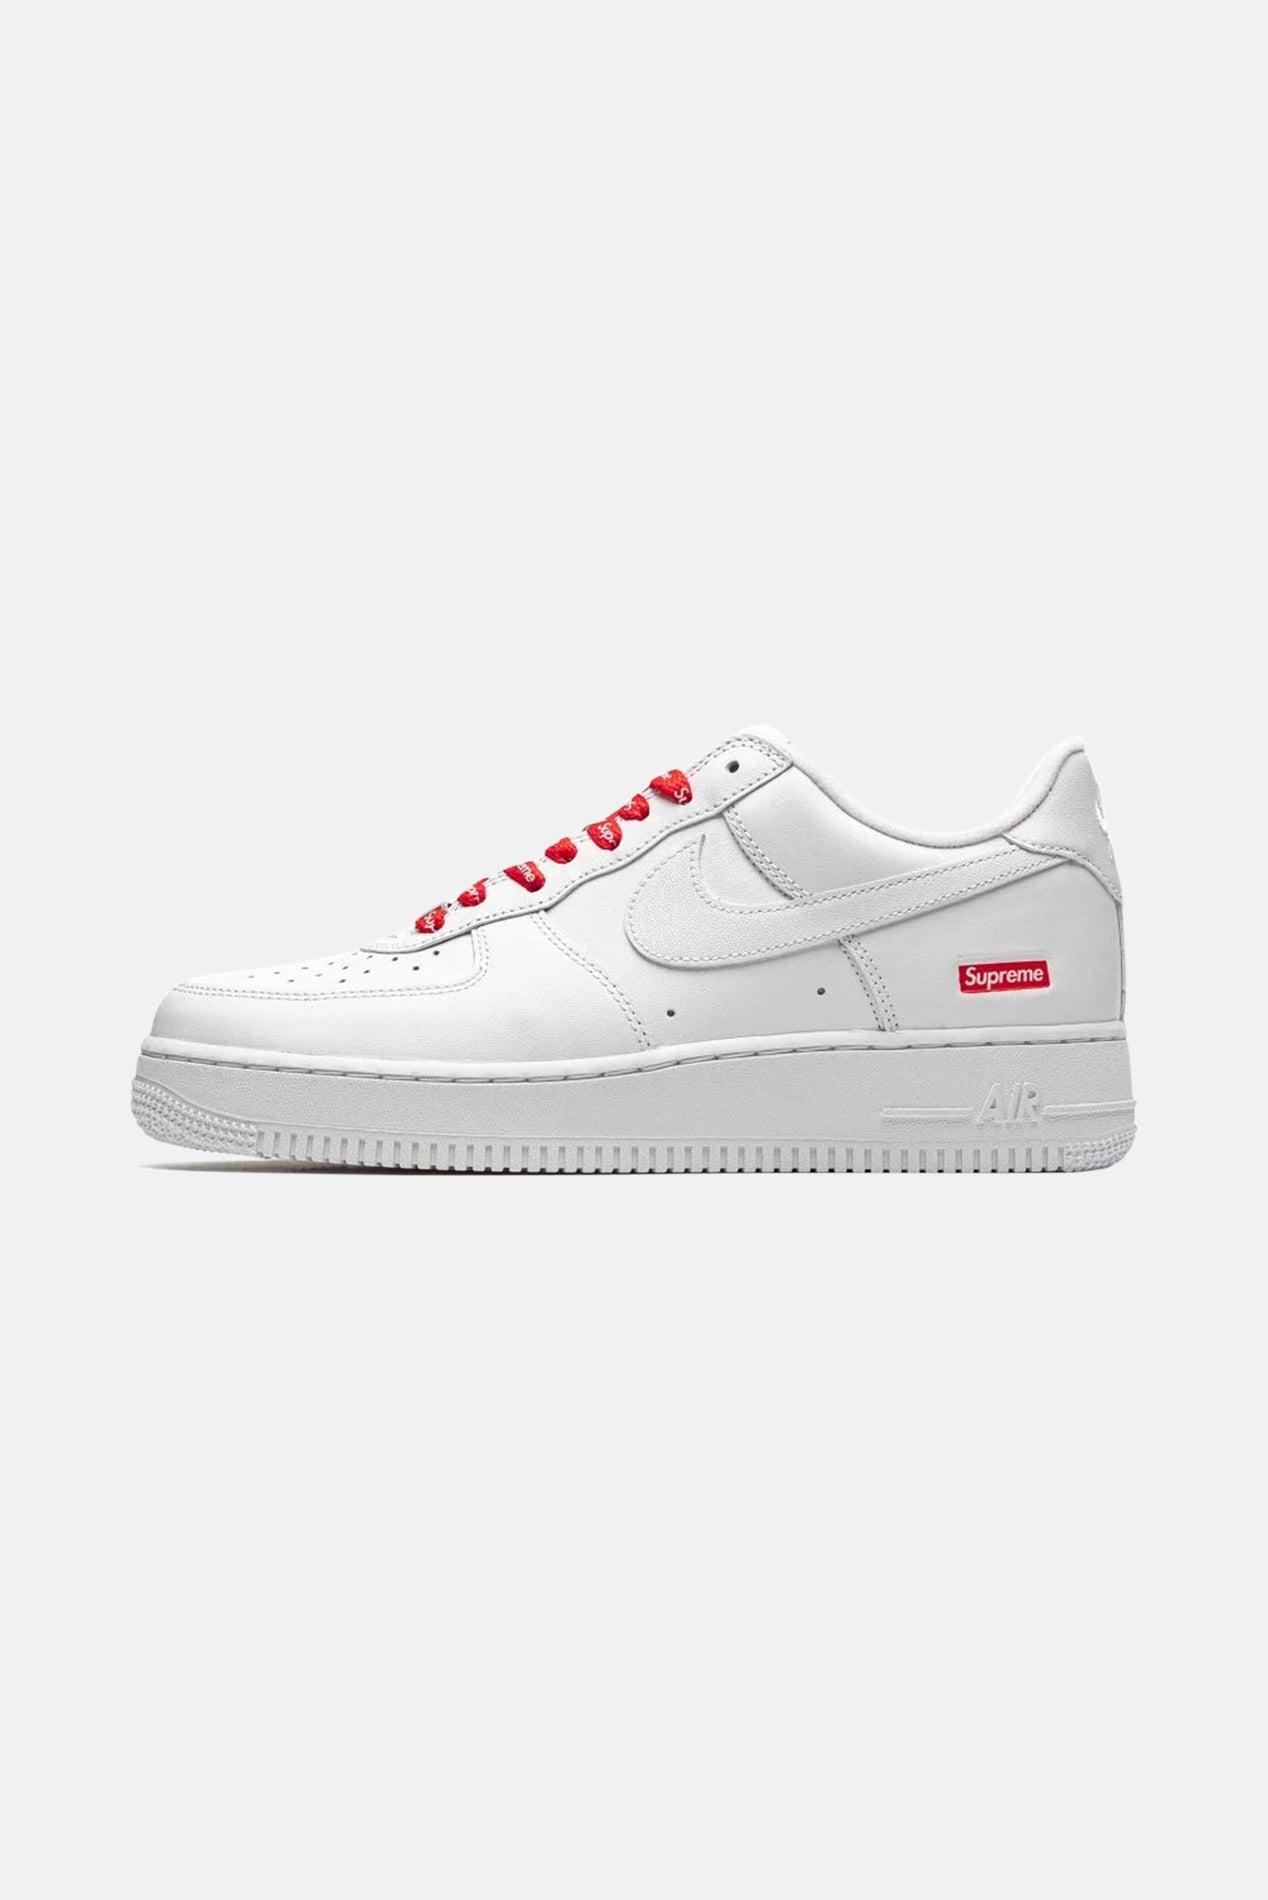 Supreme Nike Air Force 1 Low in White | Lyst